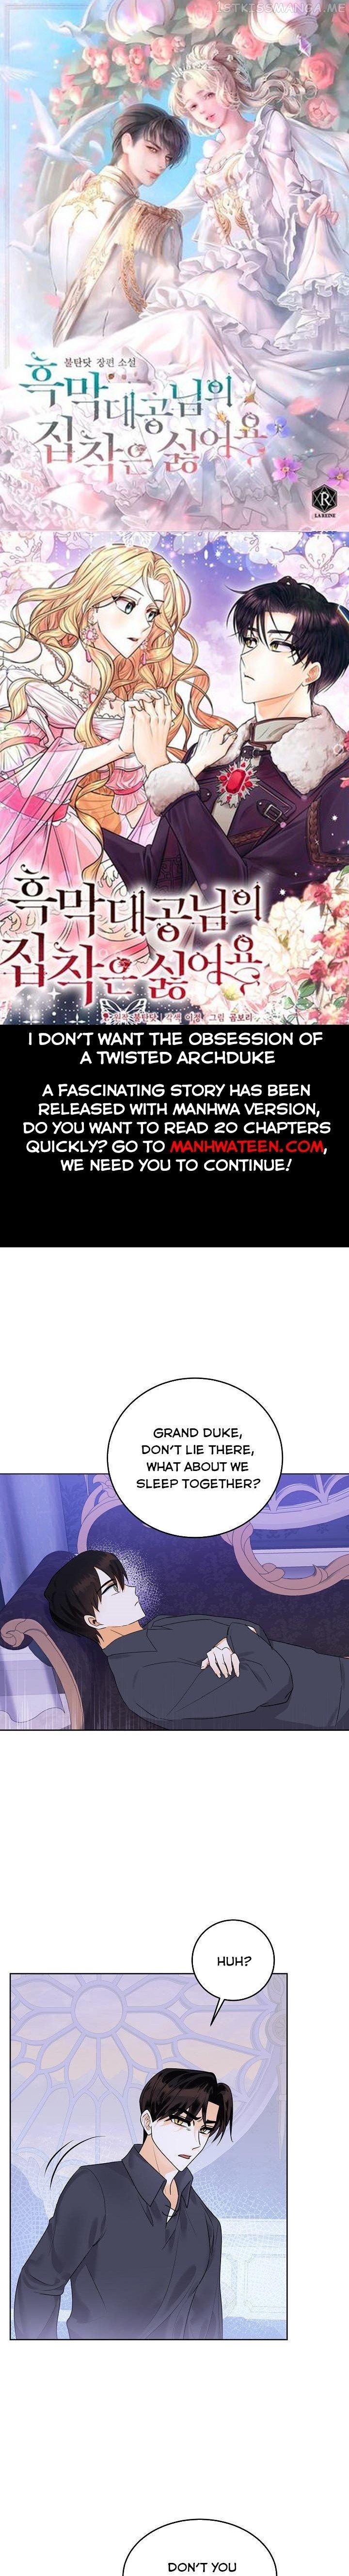 I Don't Want the Obsession of a Twisted Archduke Chapter 7 page 1